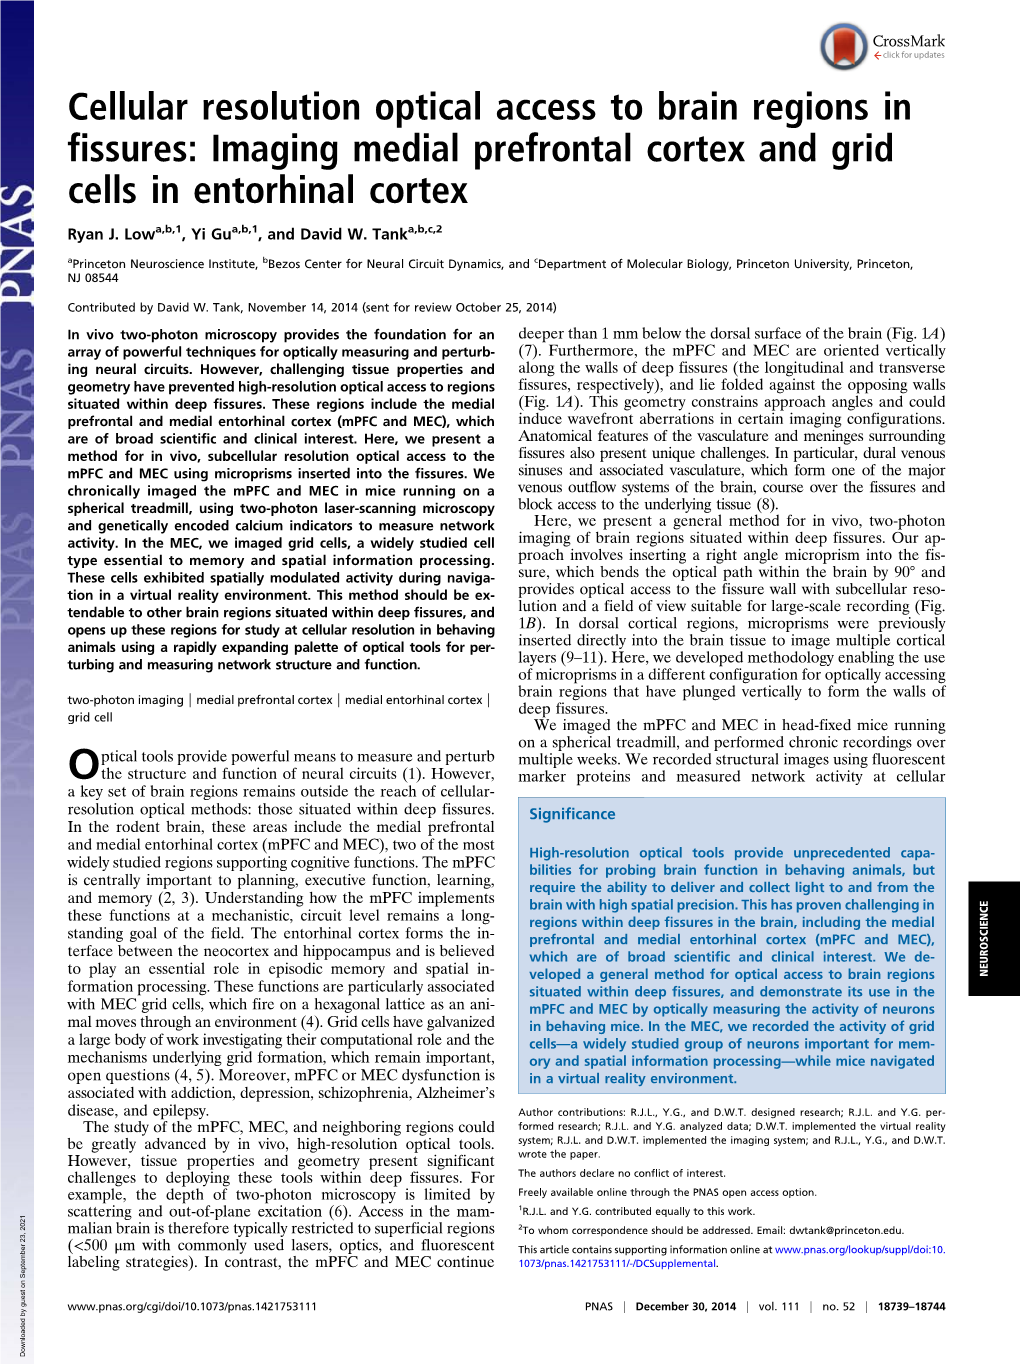 Cellular Resolution Optical Access to Brain Regions in Fissures: Imaging Medial Prefrontal Cortex and Grid Cells in Entorhinal Cortex